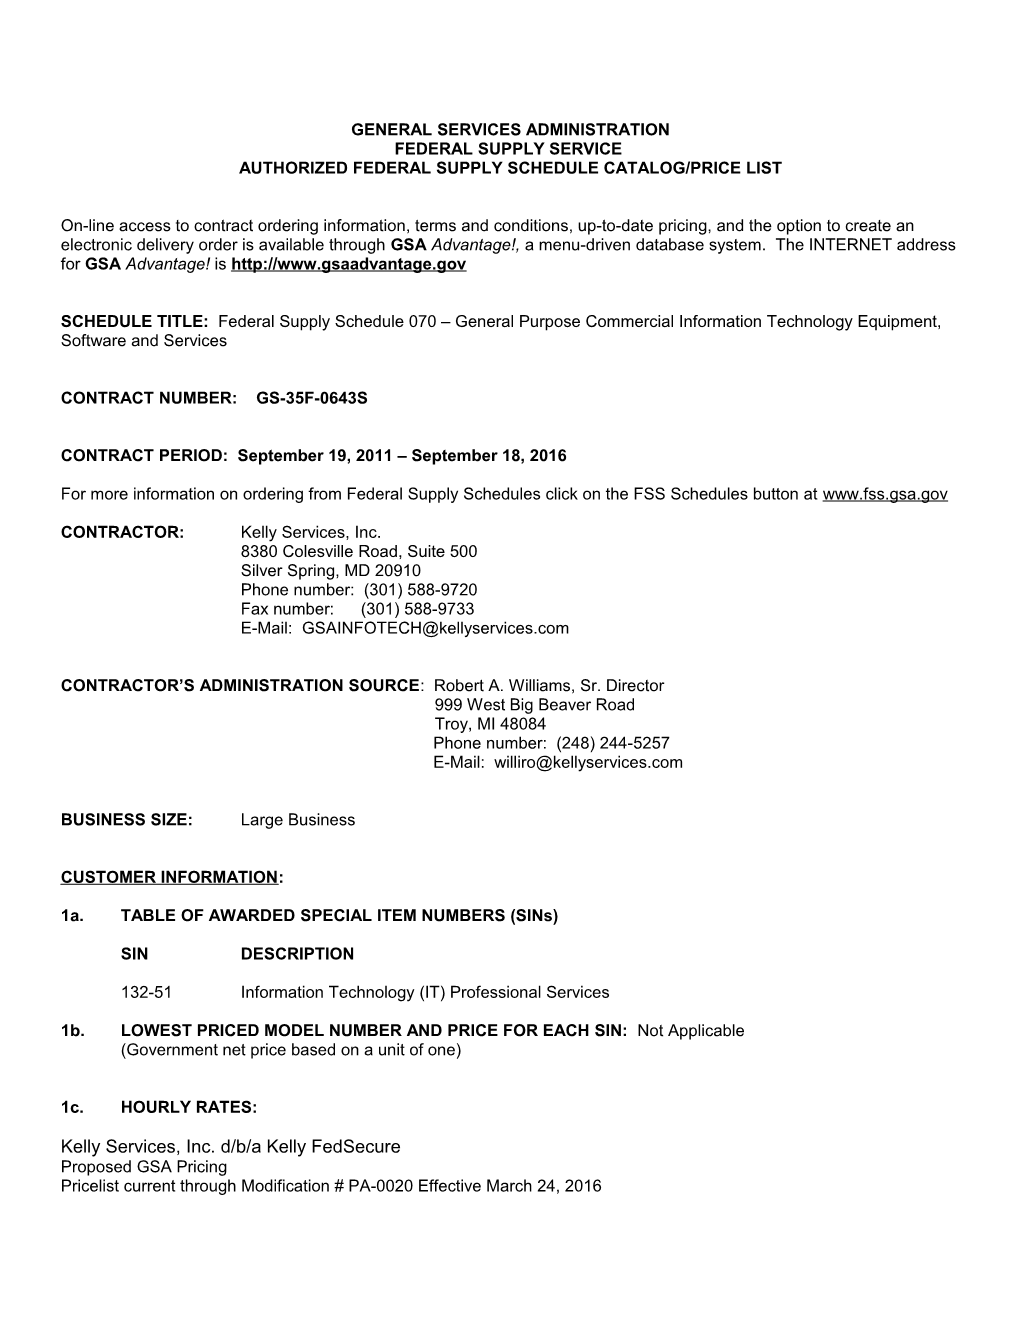 Standard Form 1449, Contract for Commercial Items (Cont D) Page 1A s6